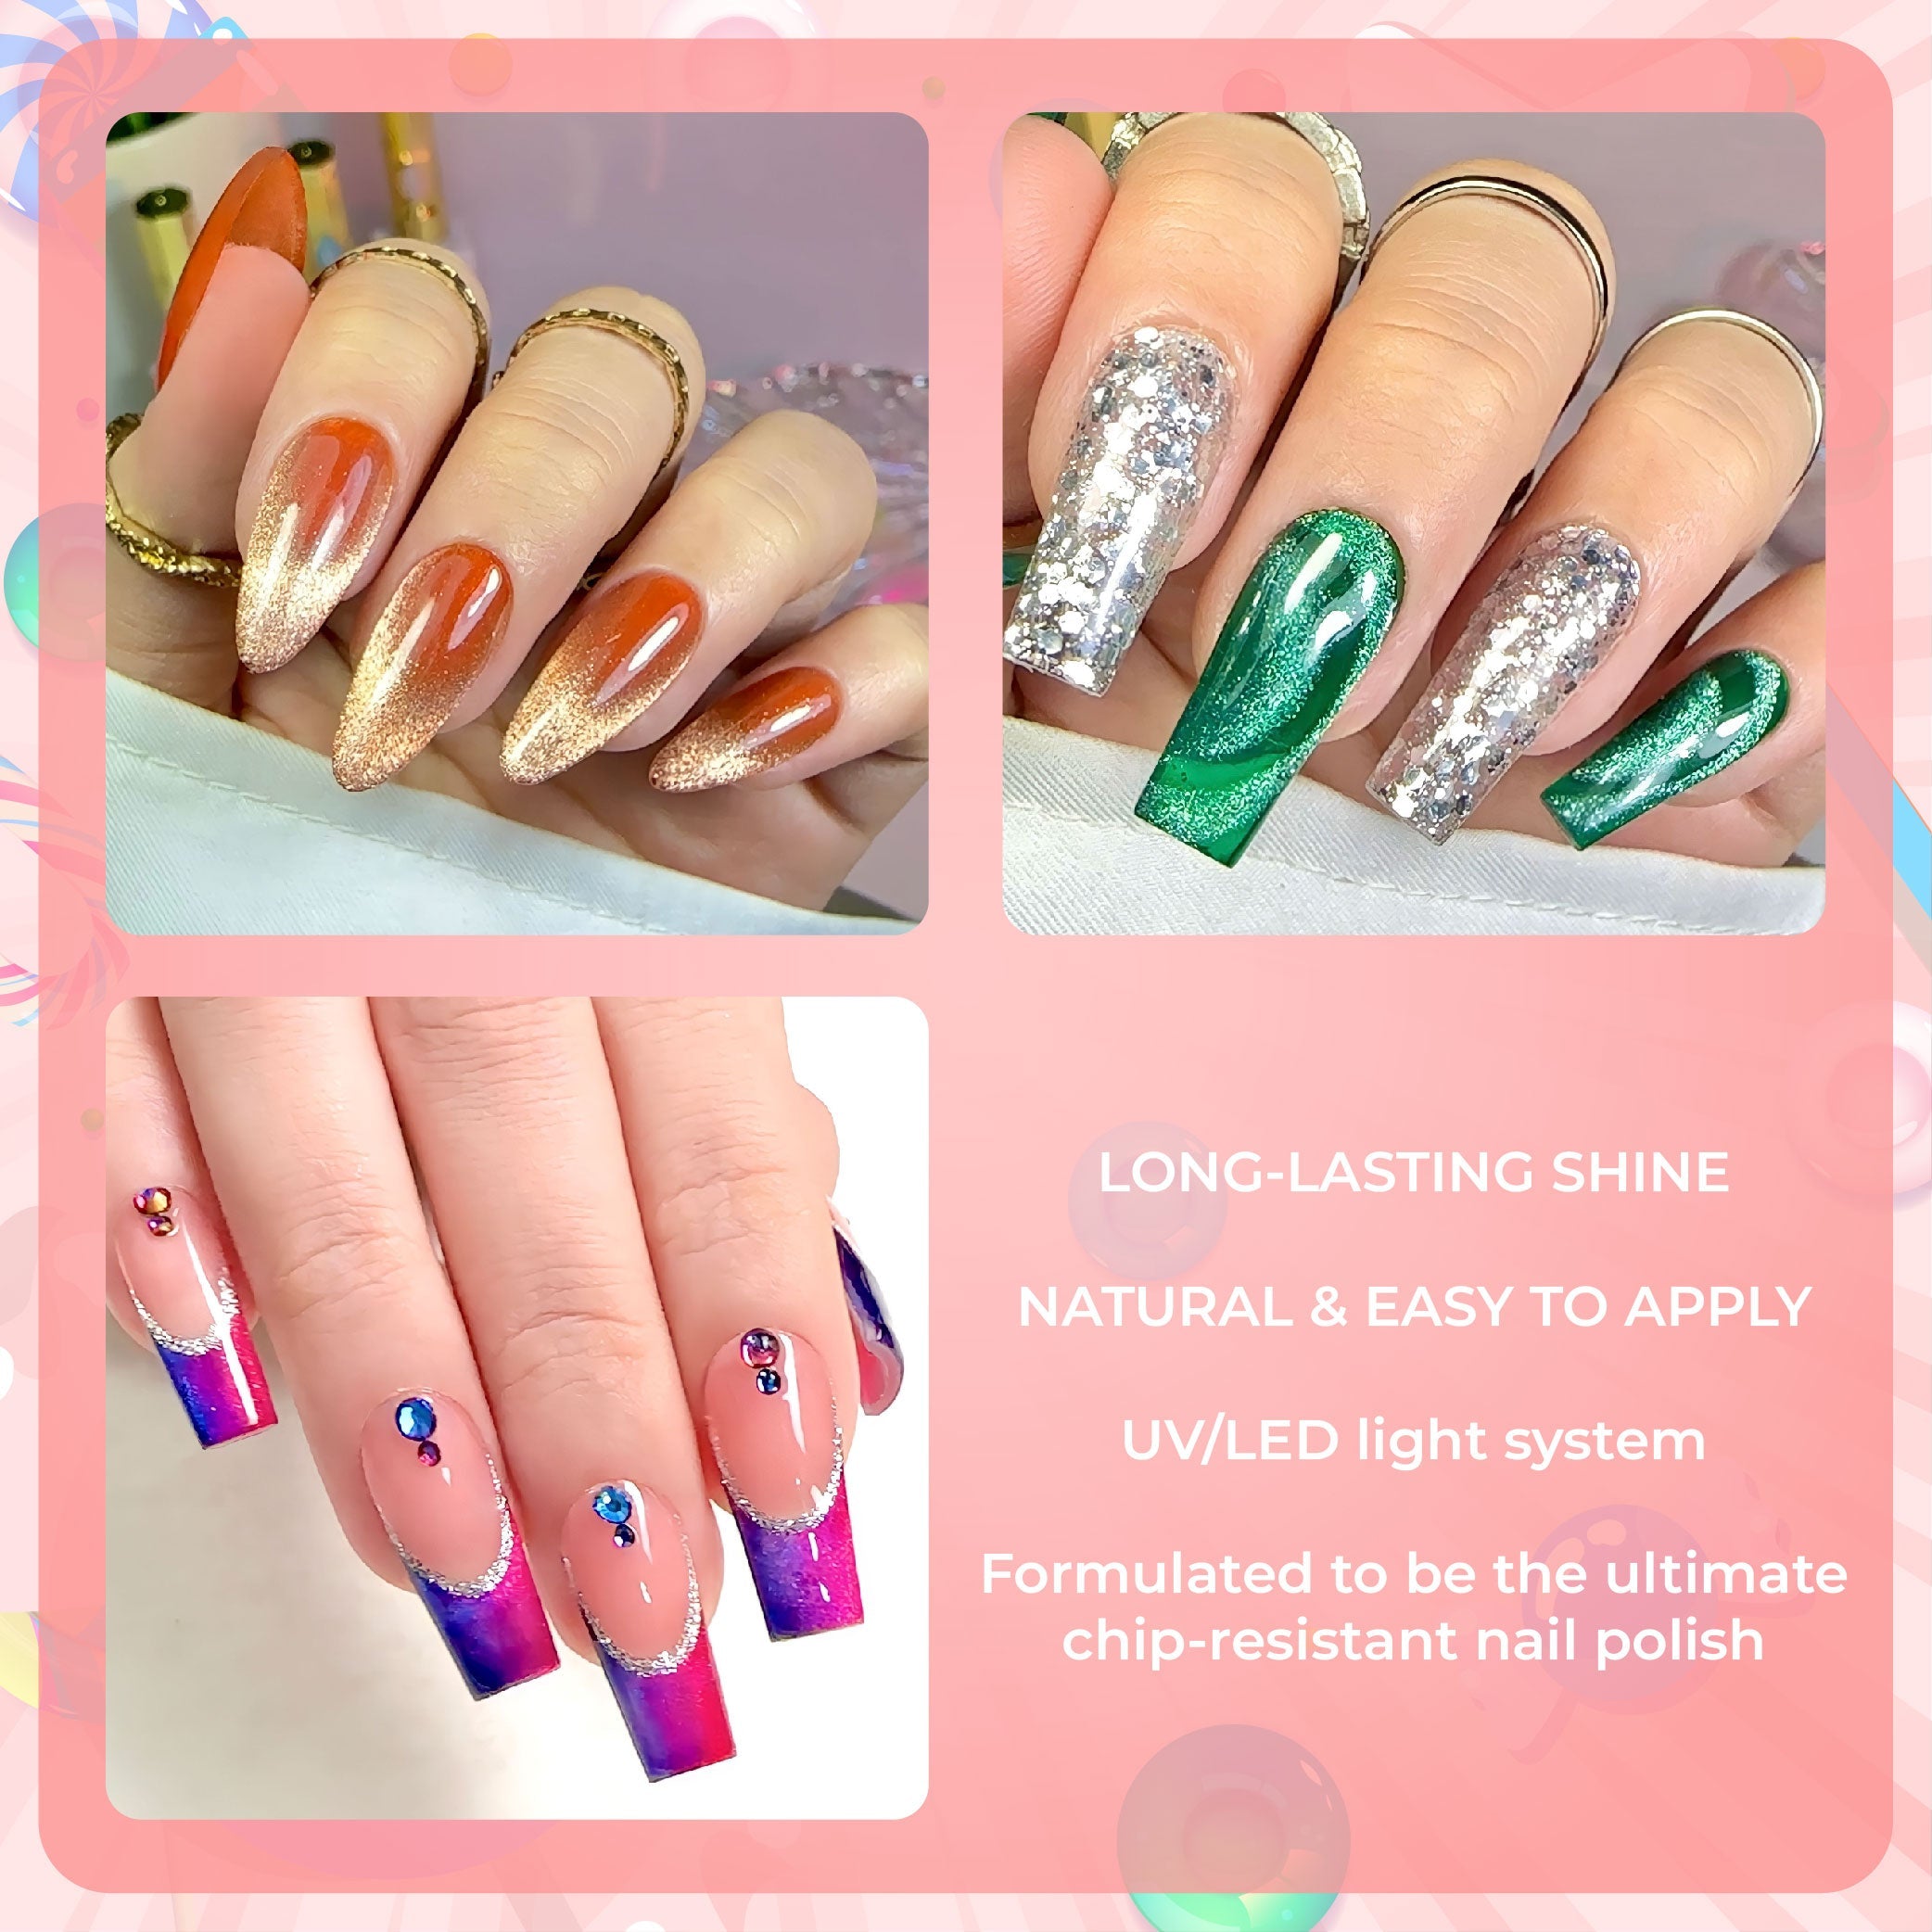 Jelly Gel Polish Colors - Lavis J02-13 - Candy Collection